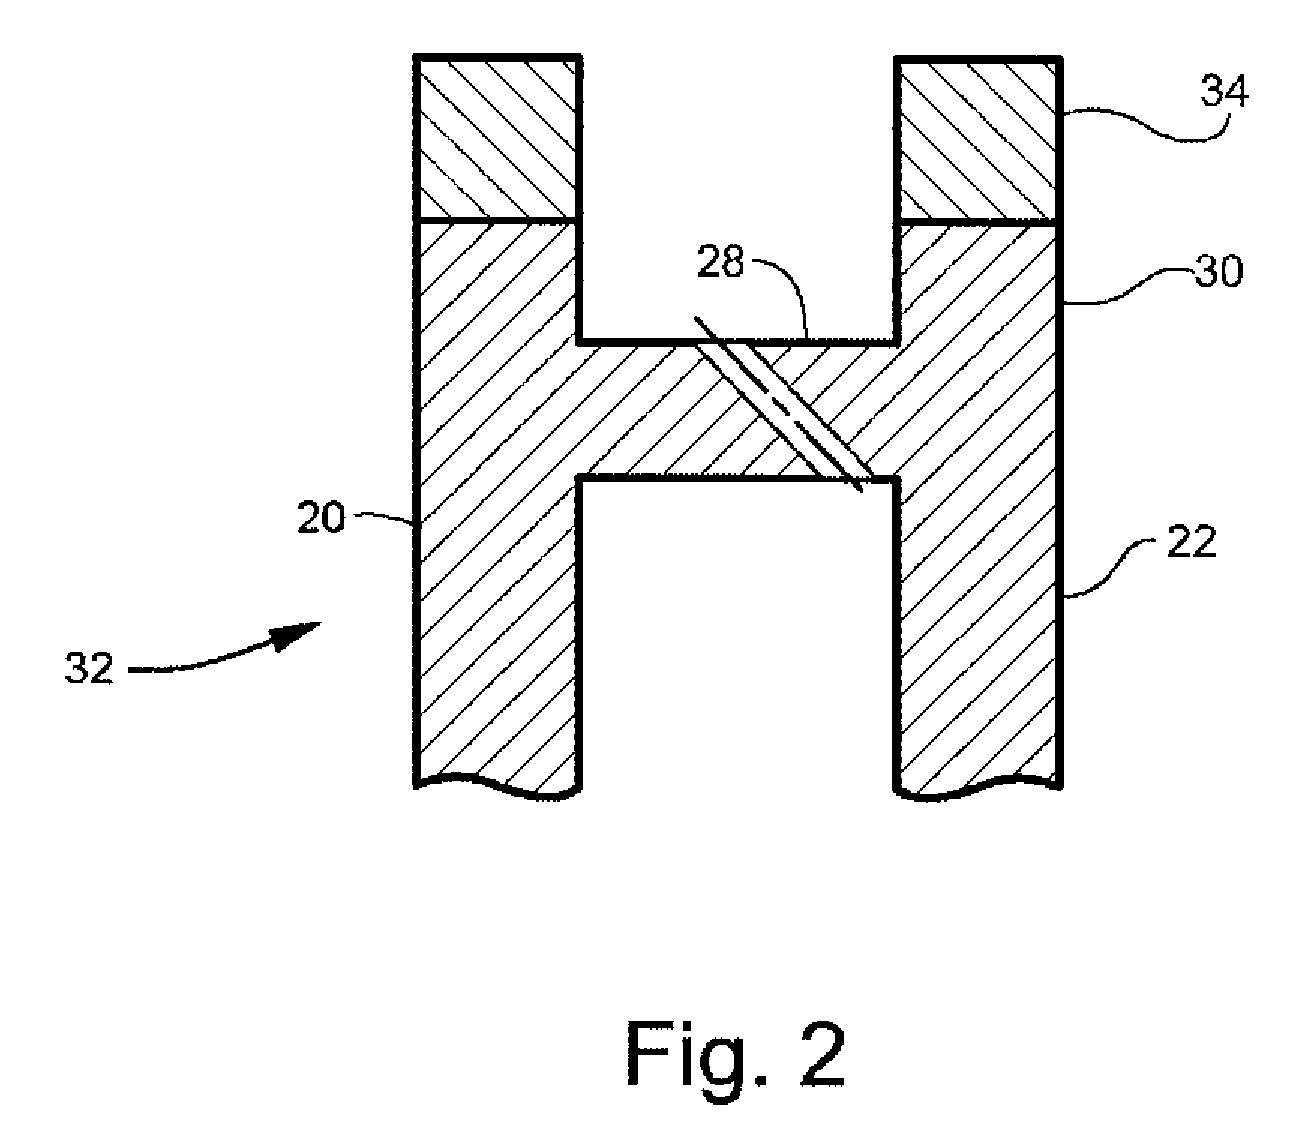 Metal injection molding process for bimetallic applications and airfoil